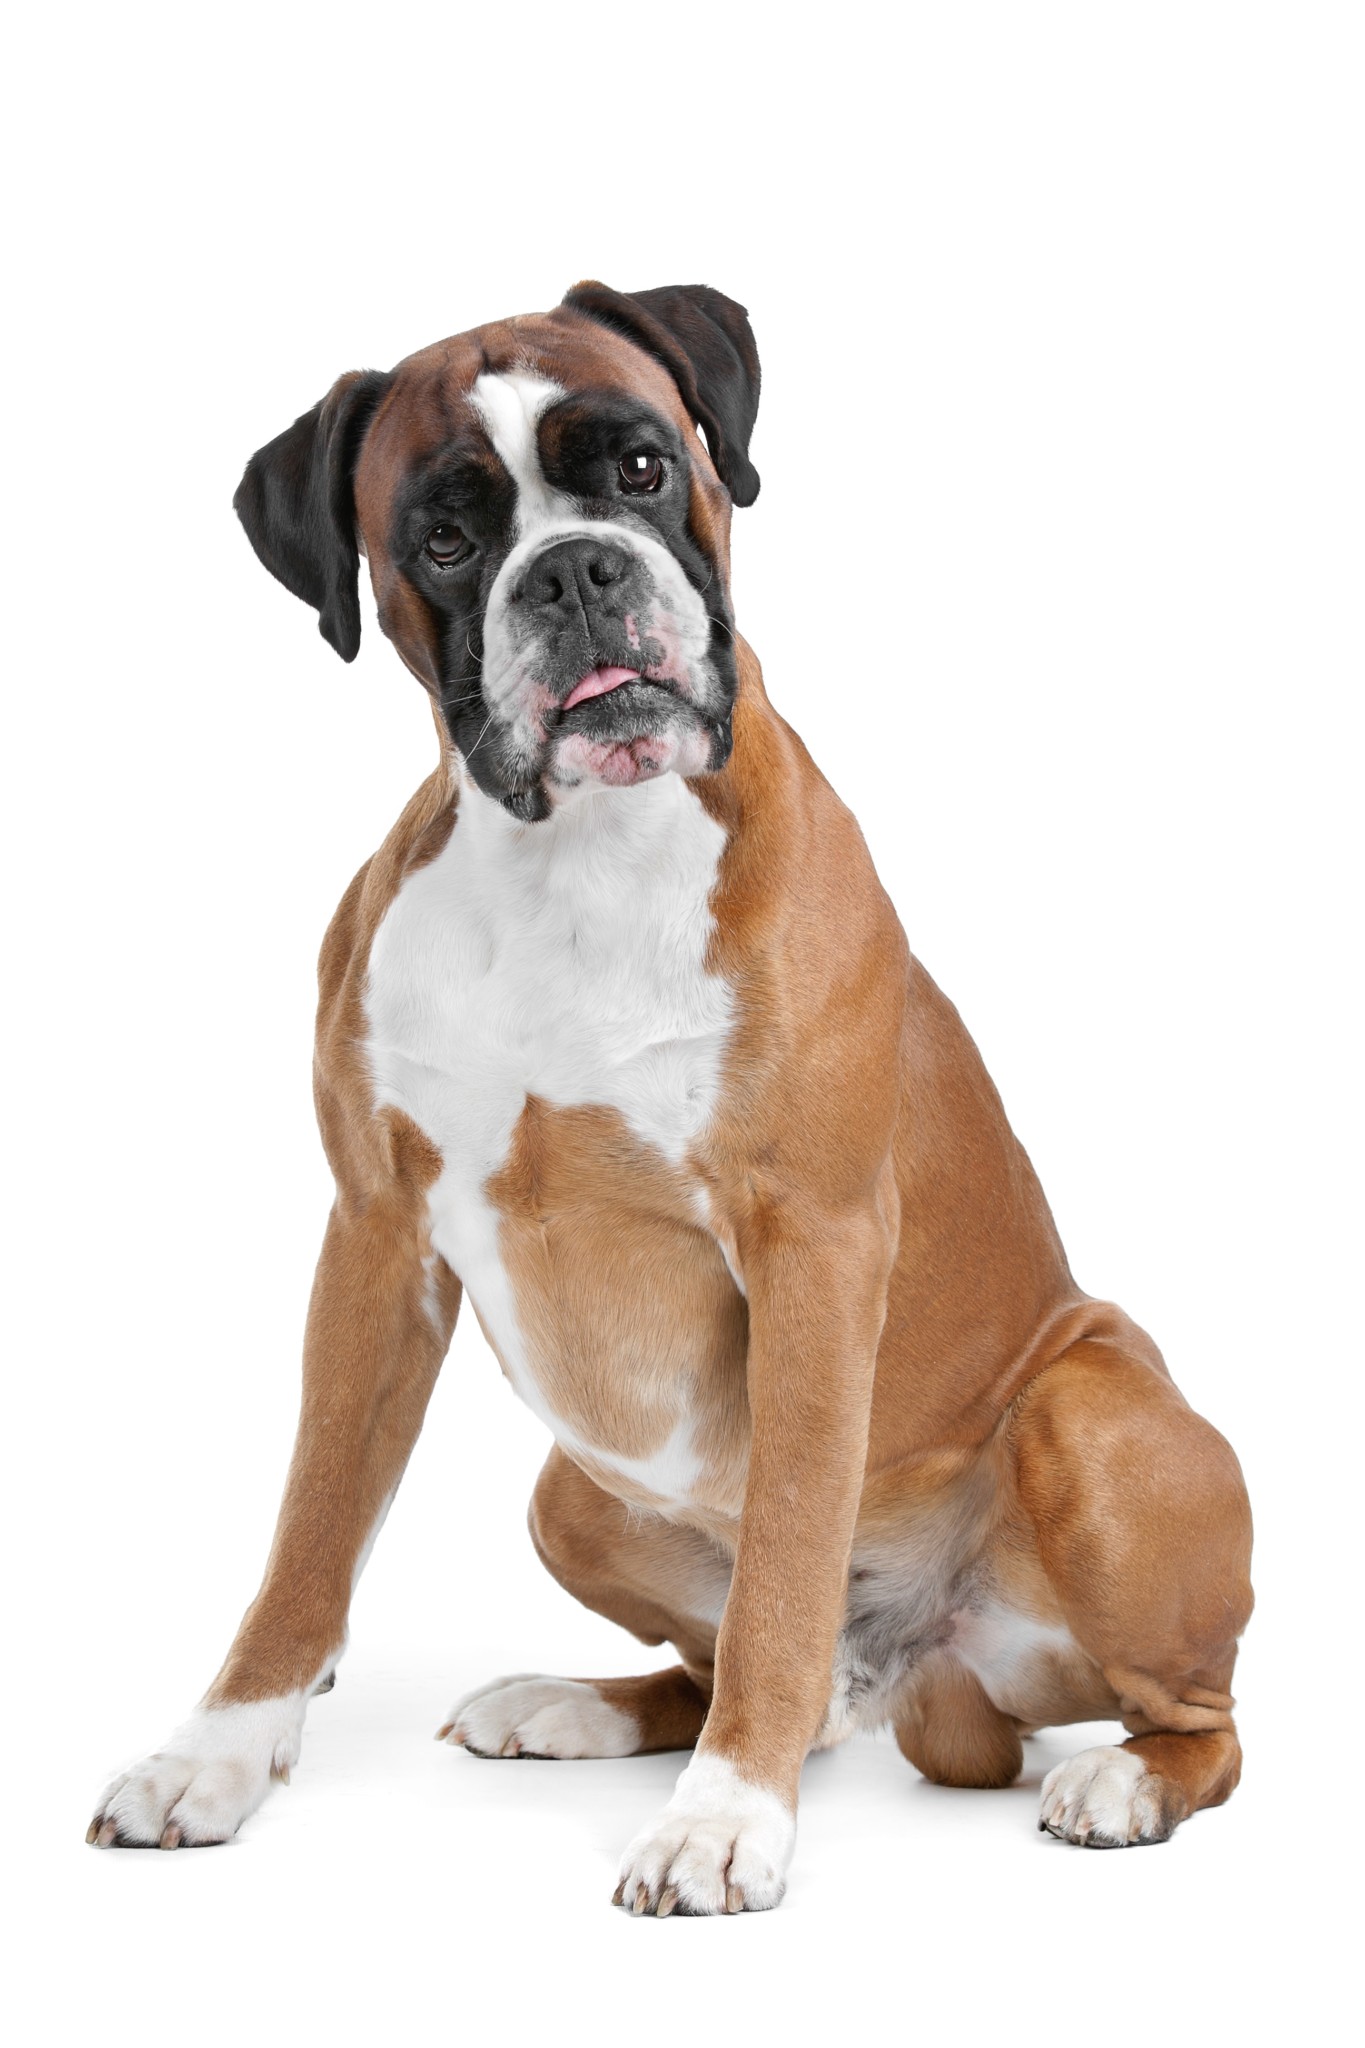 Boxer - Dog Breed Bio from Alldogboots